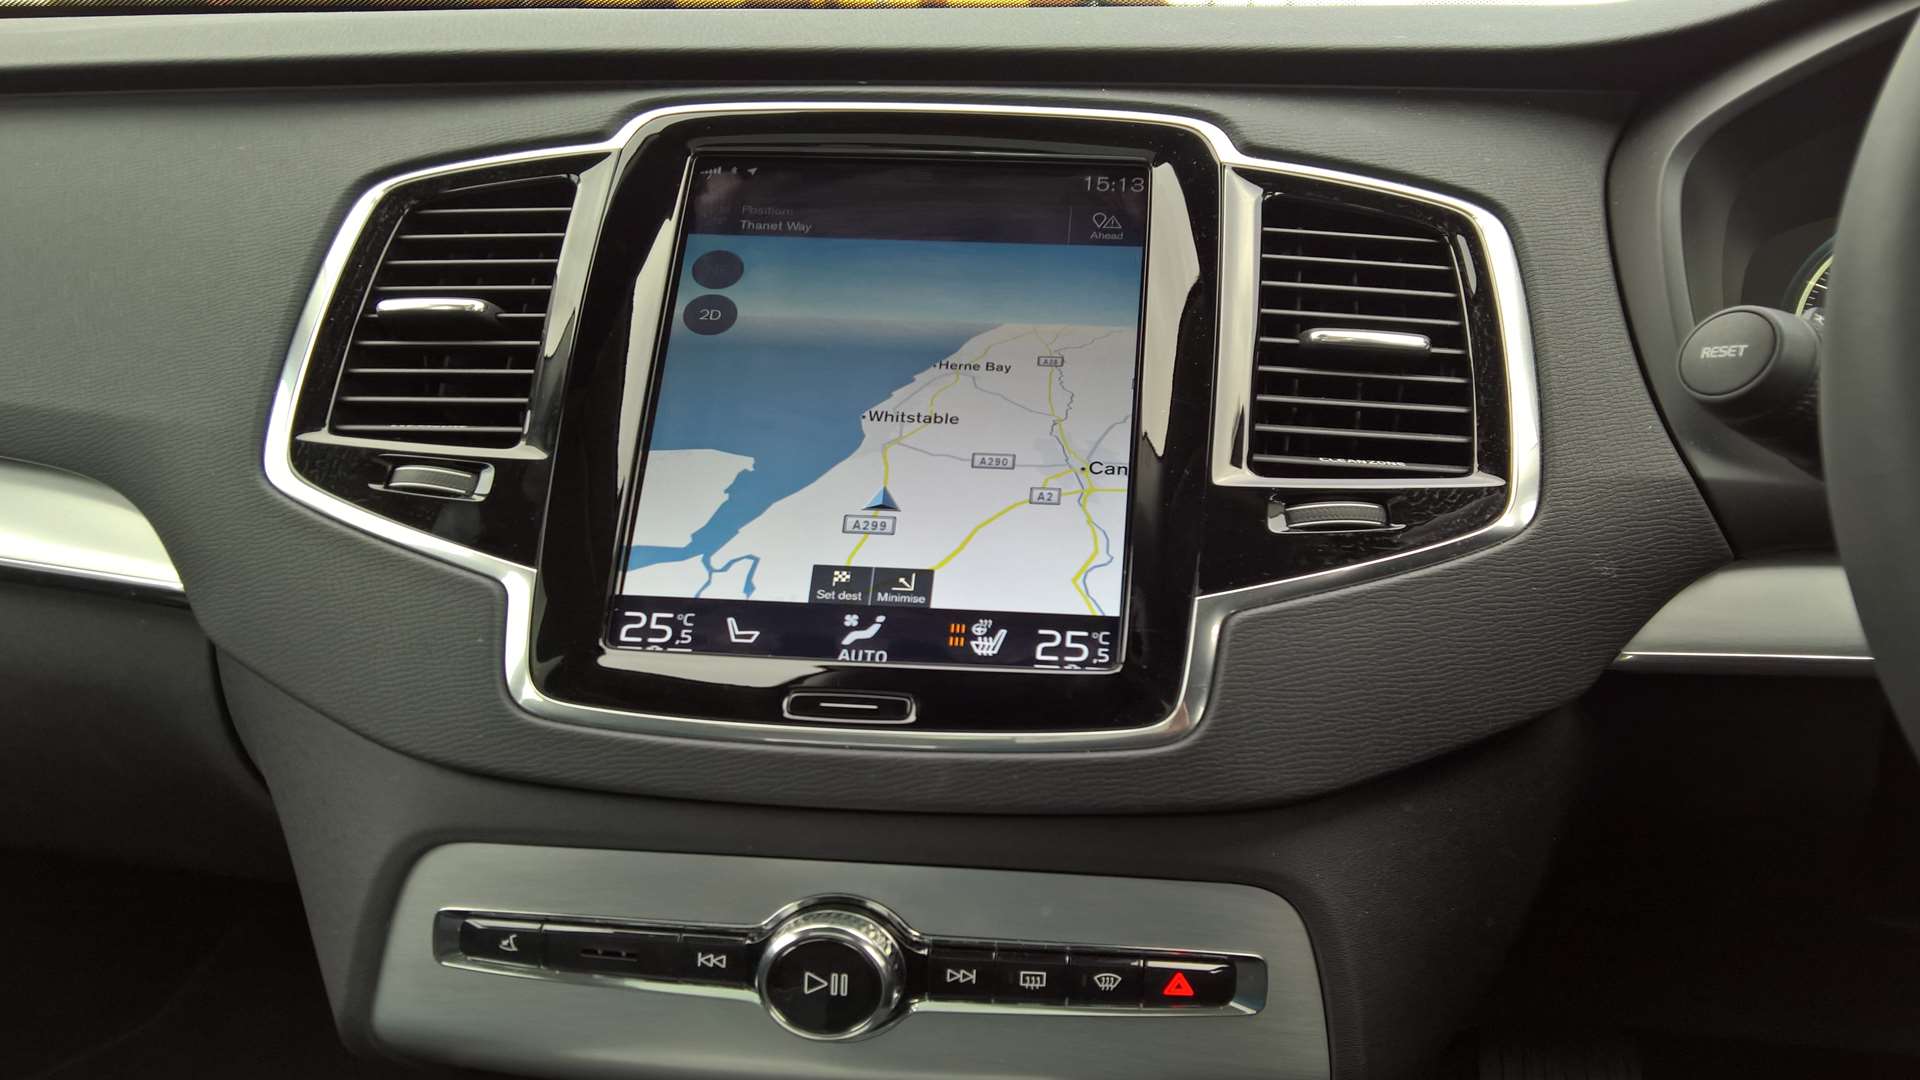 All the systems on board – climate control, Bluetooth, DAB radio and sat nav – are controlled via the touch screen